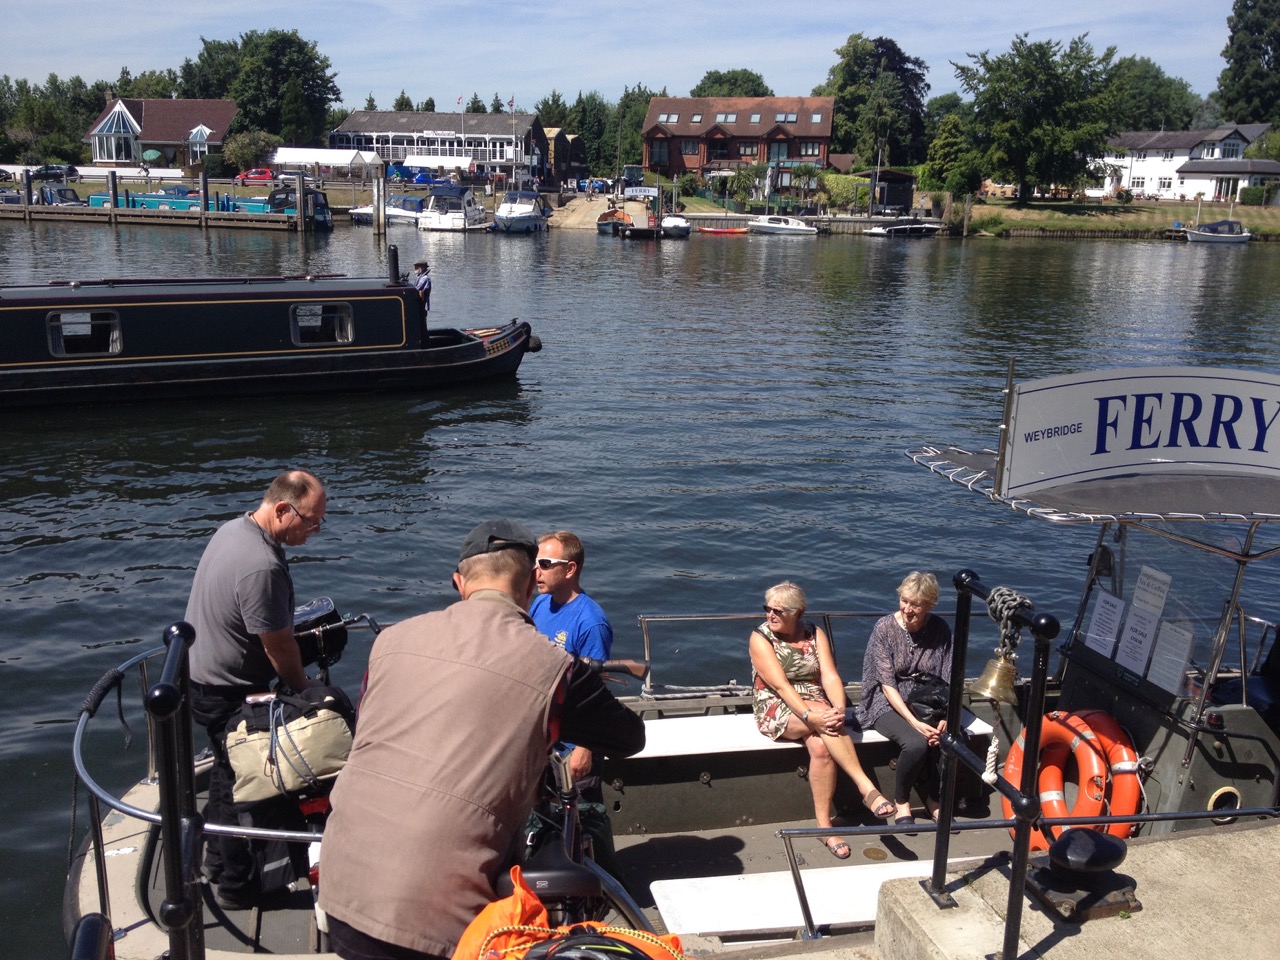 The Shepperton ferry (ring the bell!): Spokes 6, 6-7